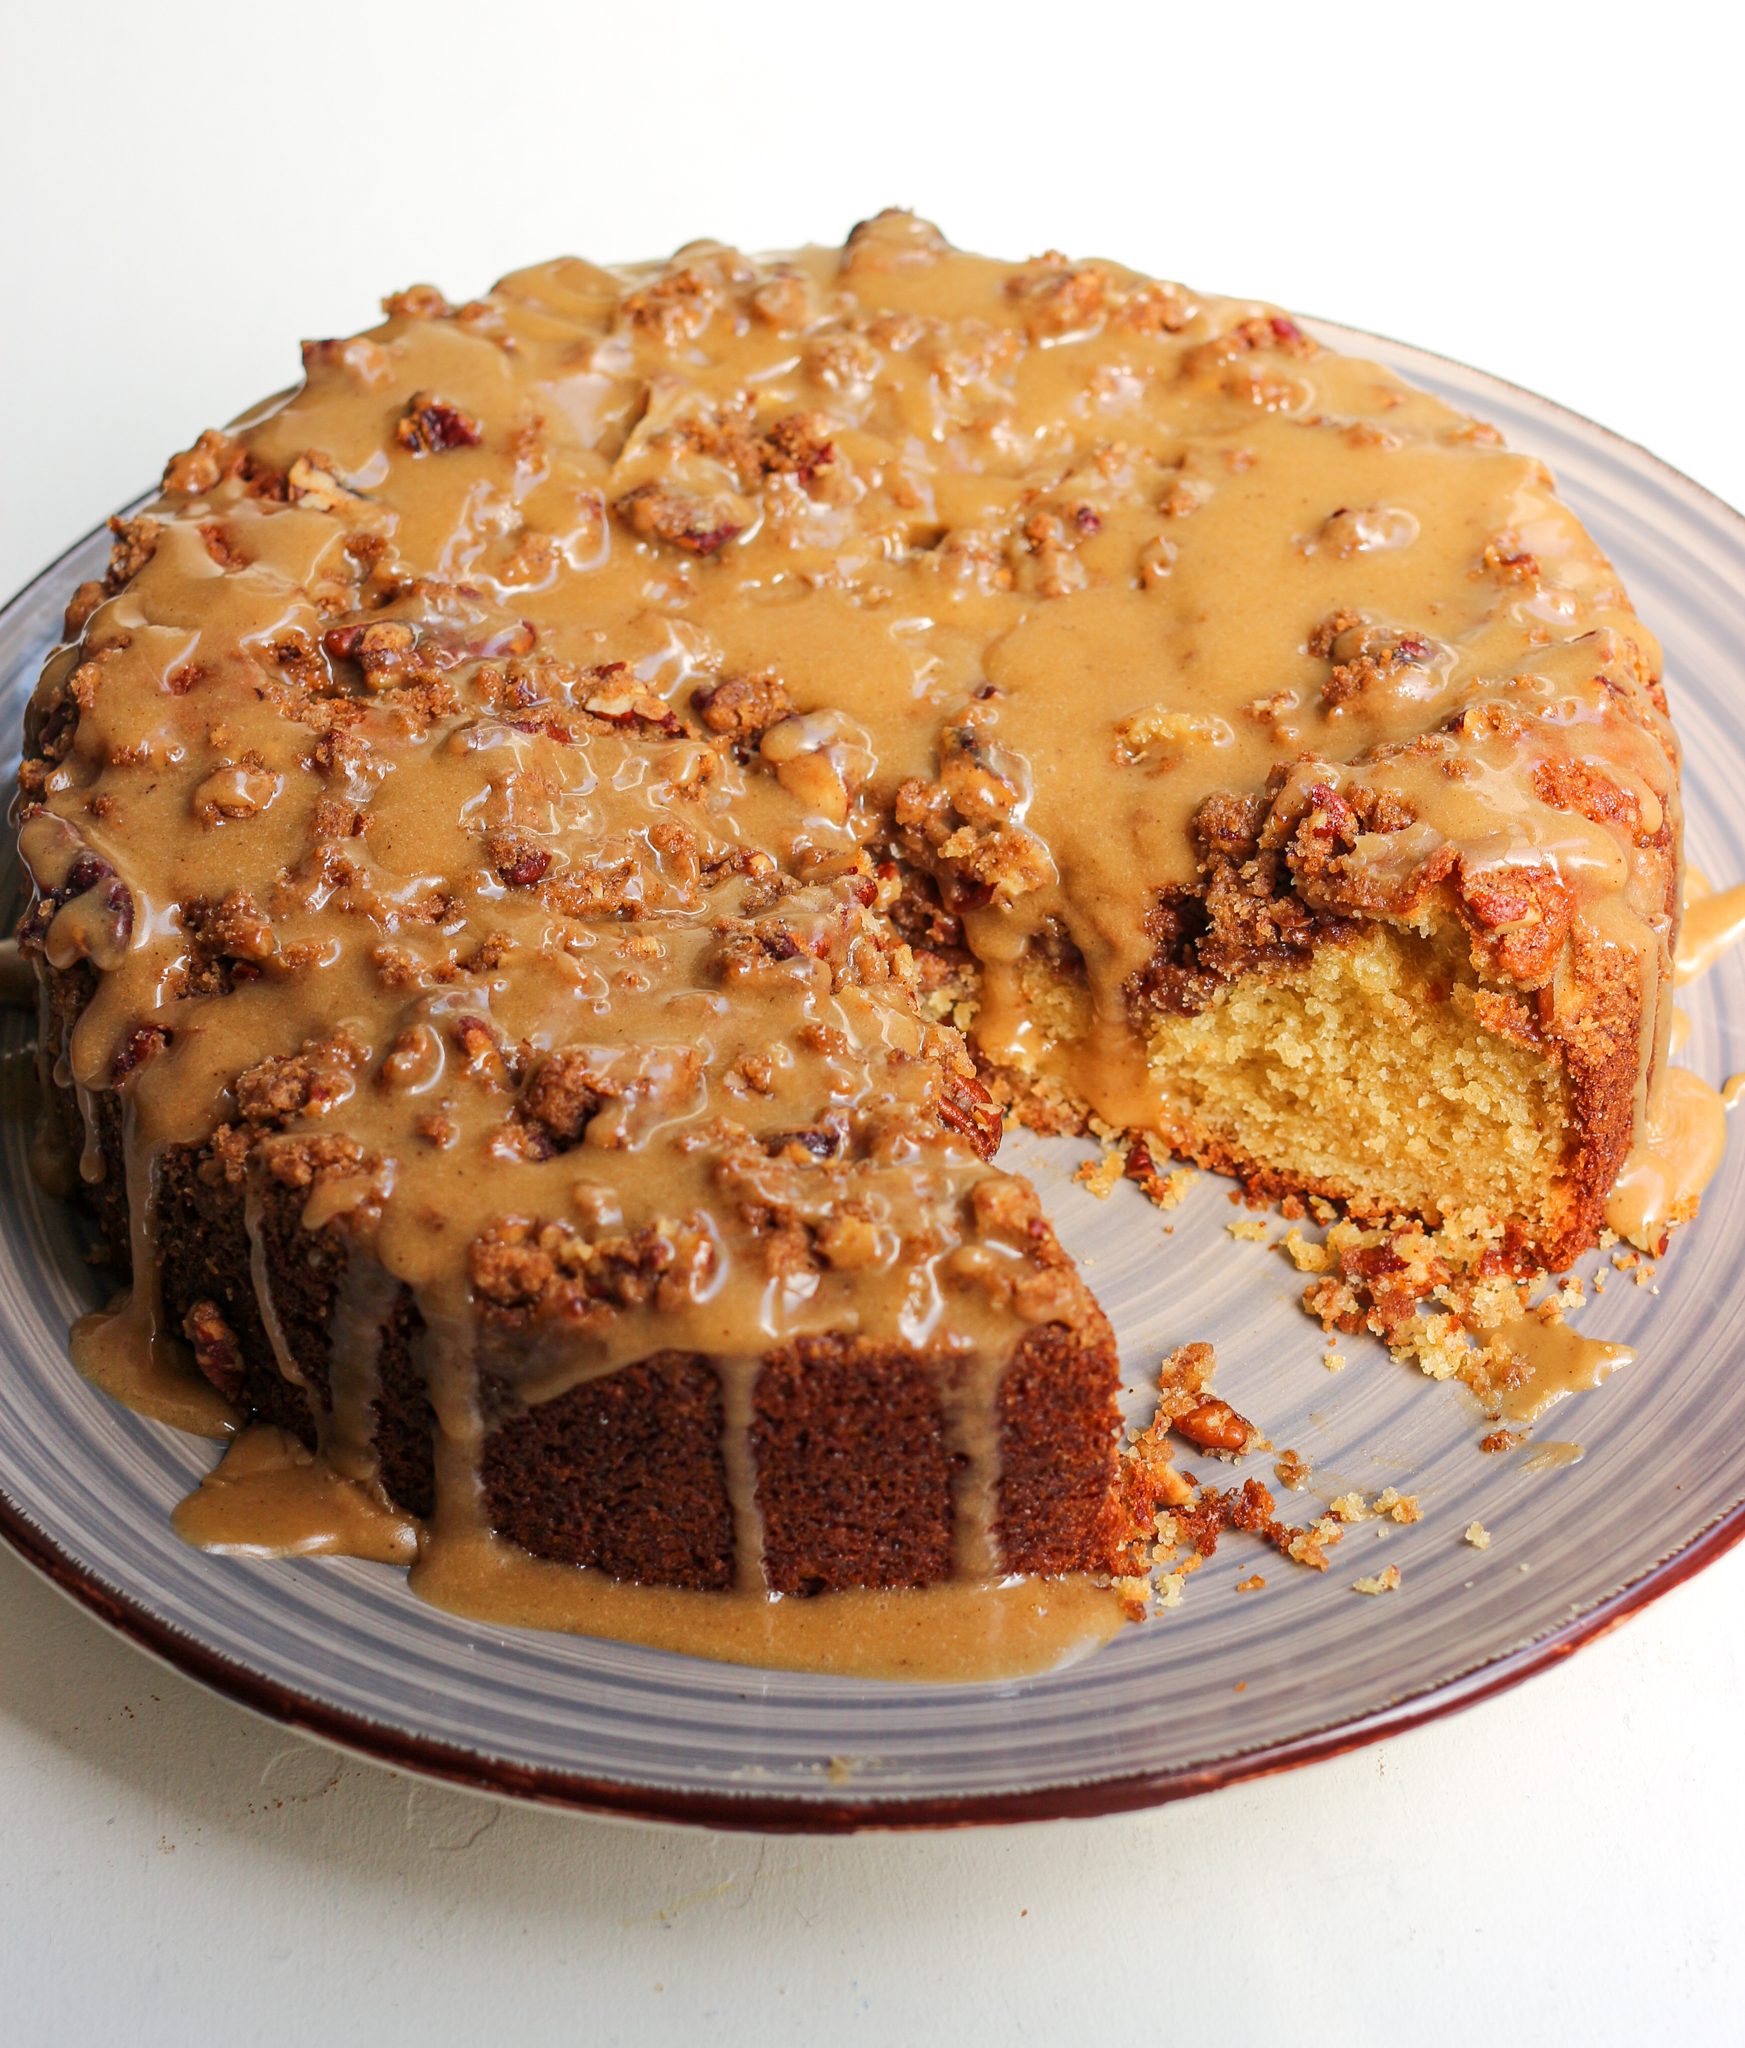 Spiced Pecan Streusel Cake with a Toffee Glaze